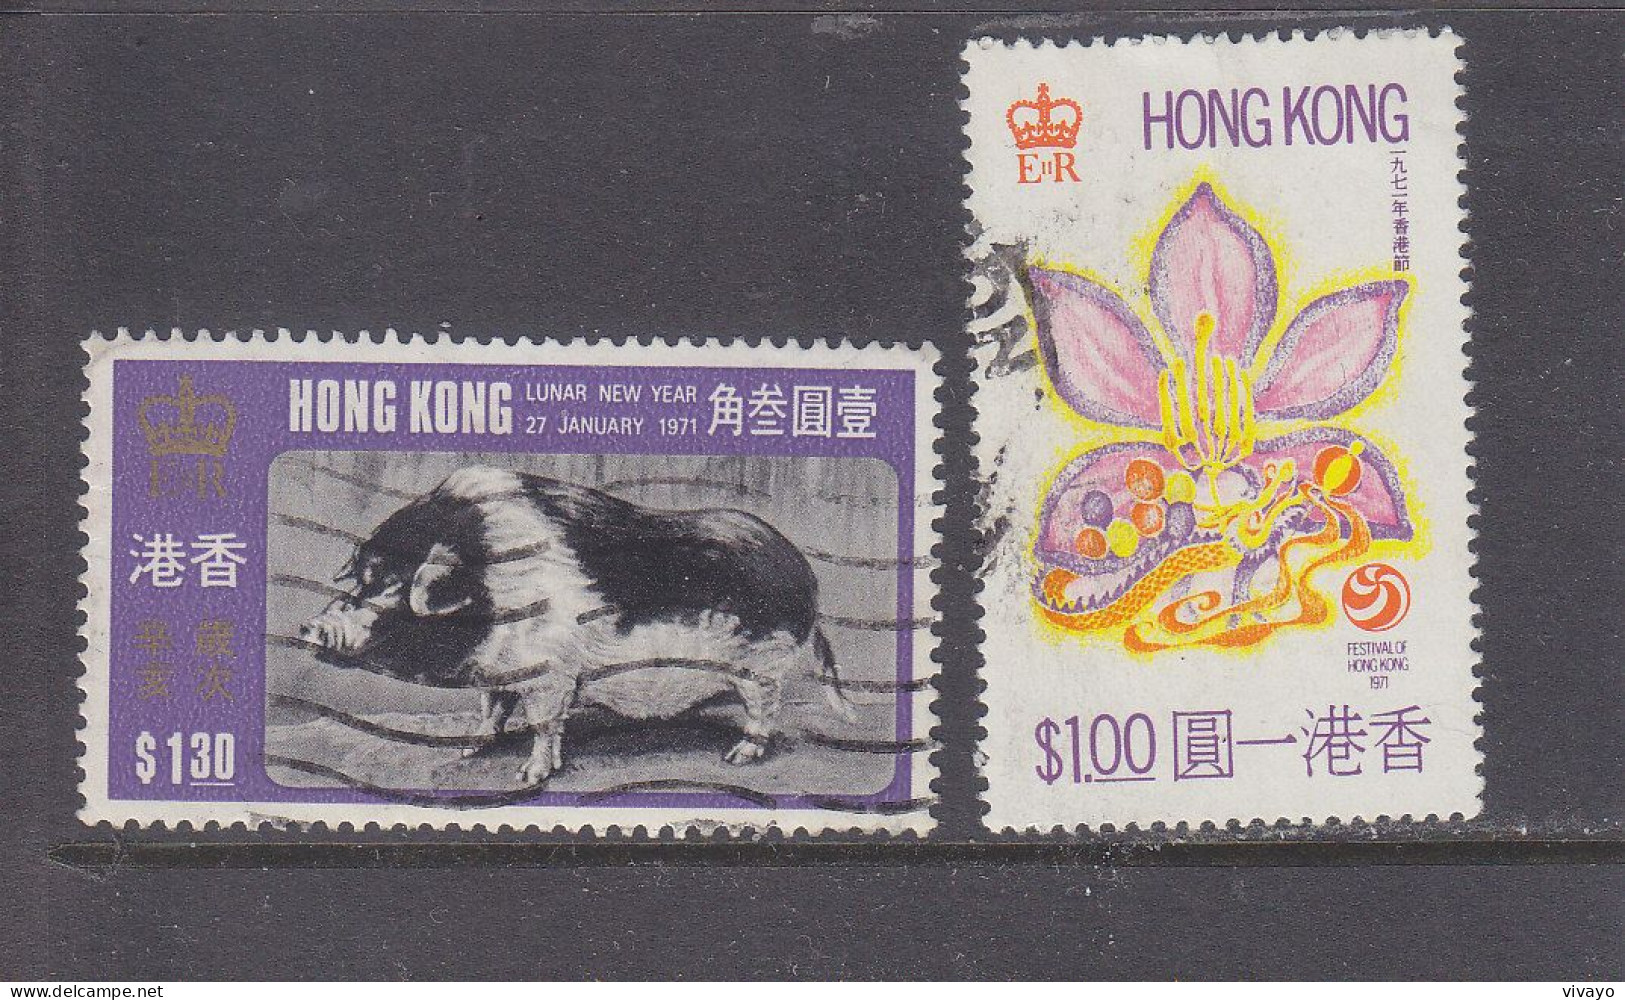 HONG KONG - O / FINE CANCELLED - 1971 - YEAR OF THE PIG, HONG KONG FESTIVAL - TOP VALUES - Yv. 252, 258 - Oblitérés